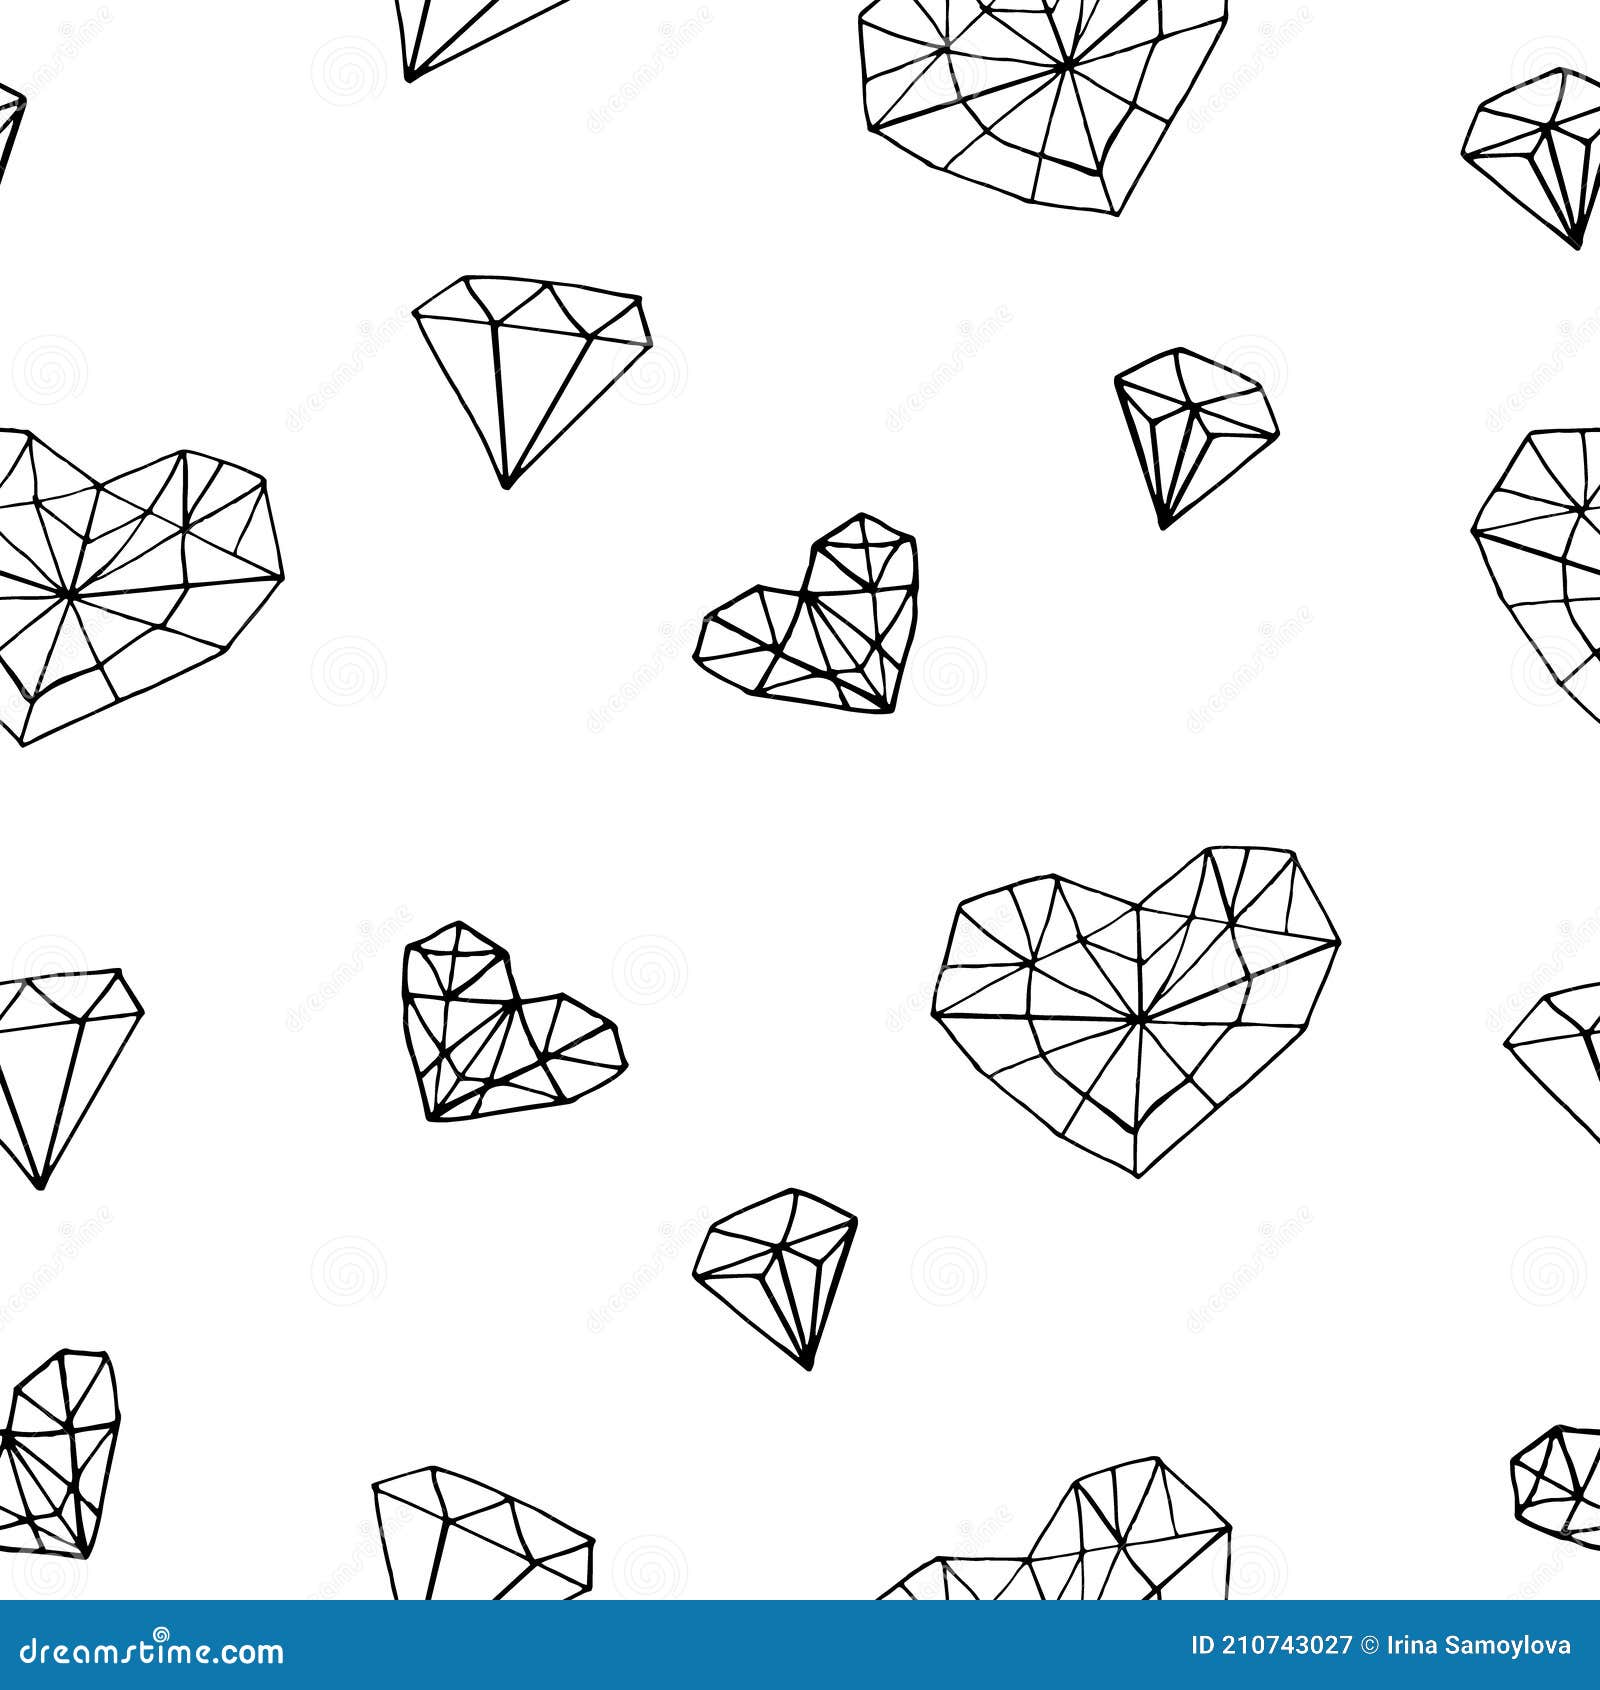 Heart Crystal Seamless Pattern. Wallpaper, Wrapping Paper, Textile. Sketch  Hand Drawn Doodle Style. Minimalism, Monochrome. Love, Stock Illustration -  Illustration of design, graphic: 210743027